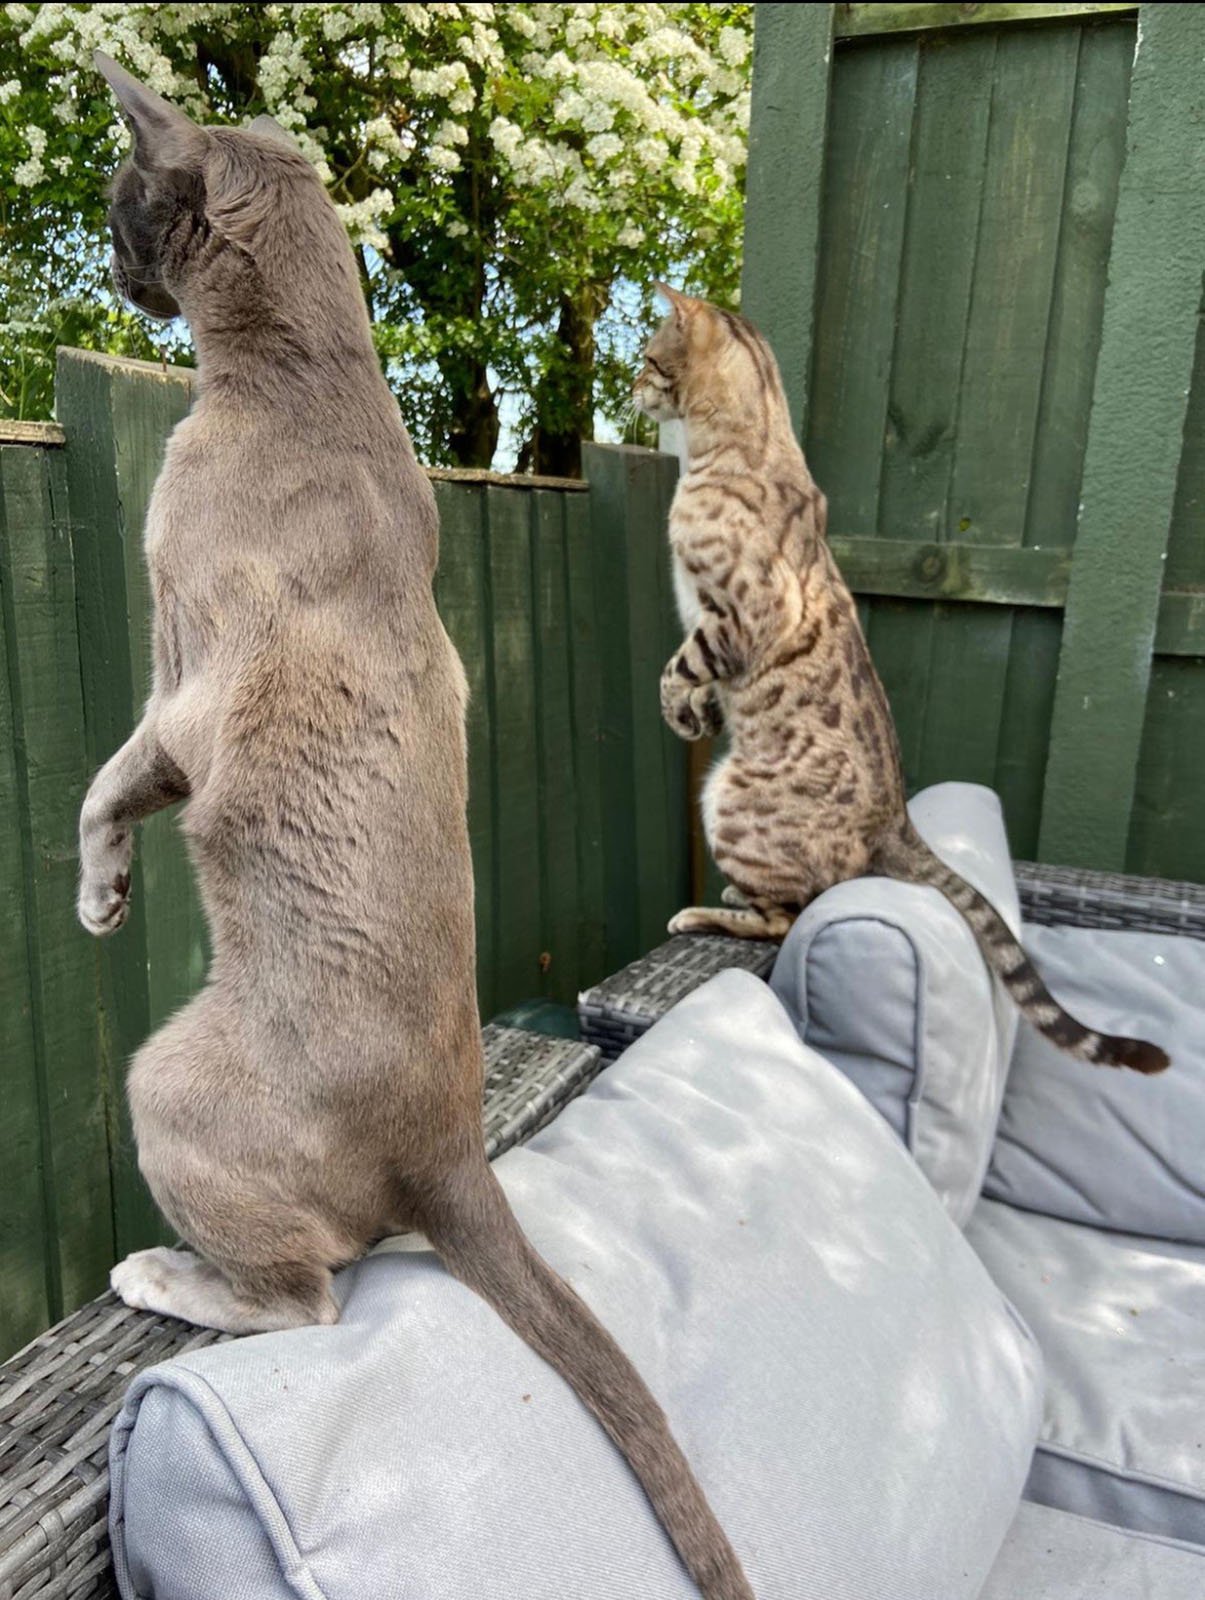 Two cats are perched on a grey outdoor sofa, standing upright on their hind legs with their front paws in the air. They appear to be intently watching something beyond the green wooden fence in a garden adorned with blooming white flowers.